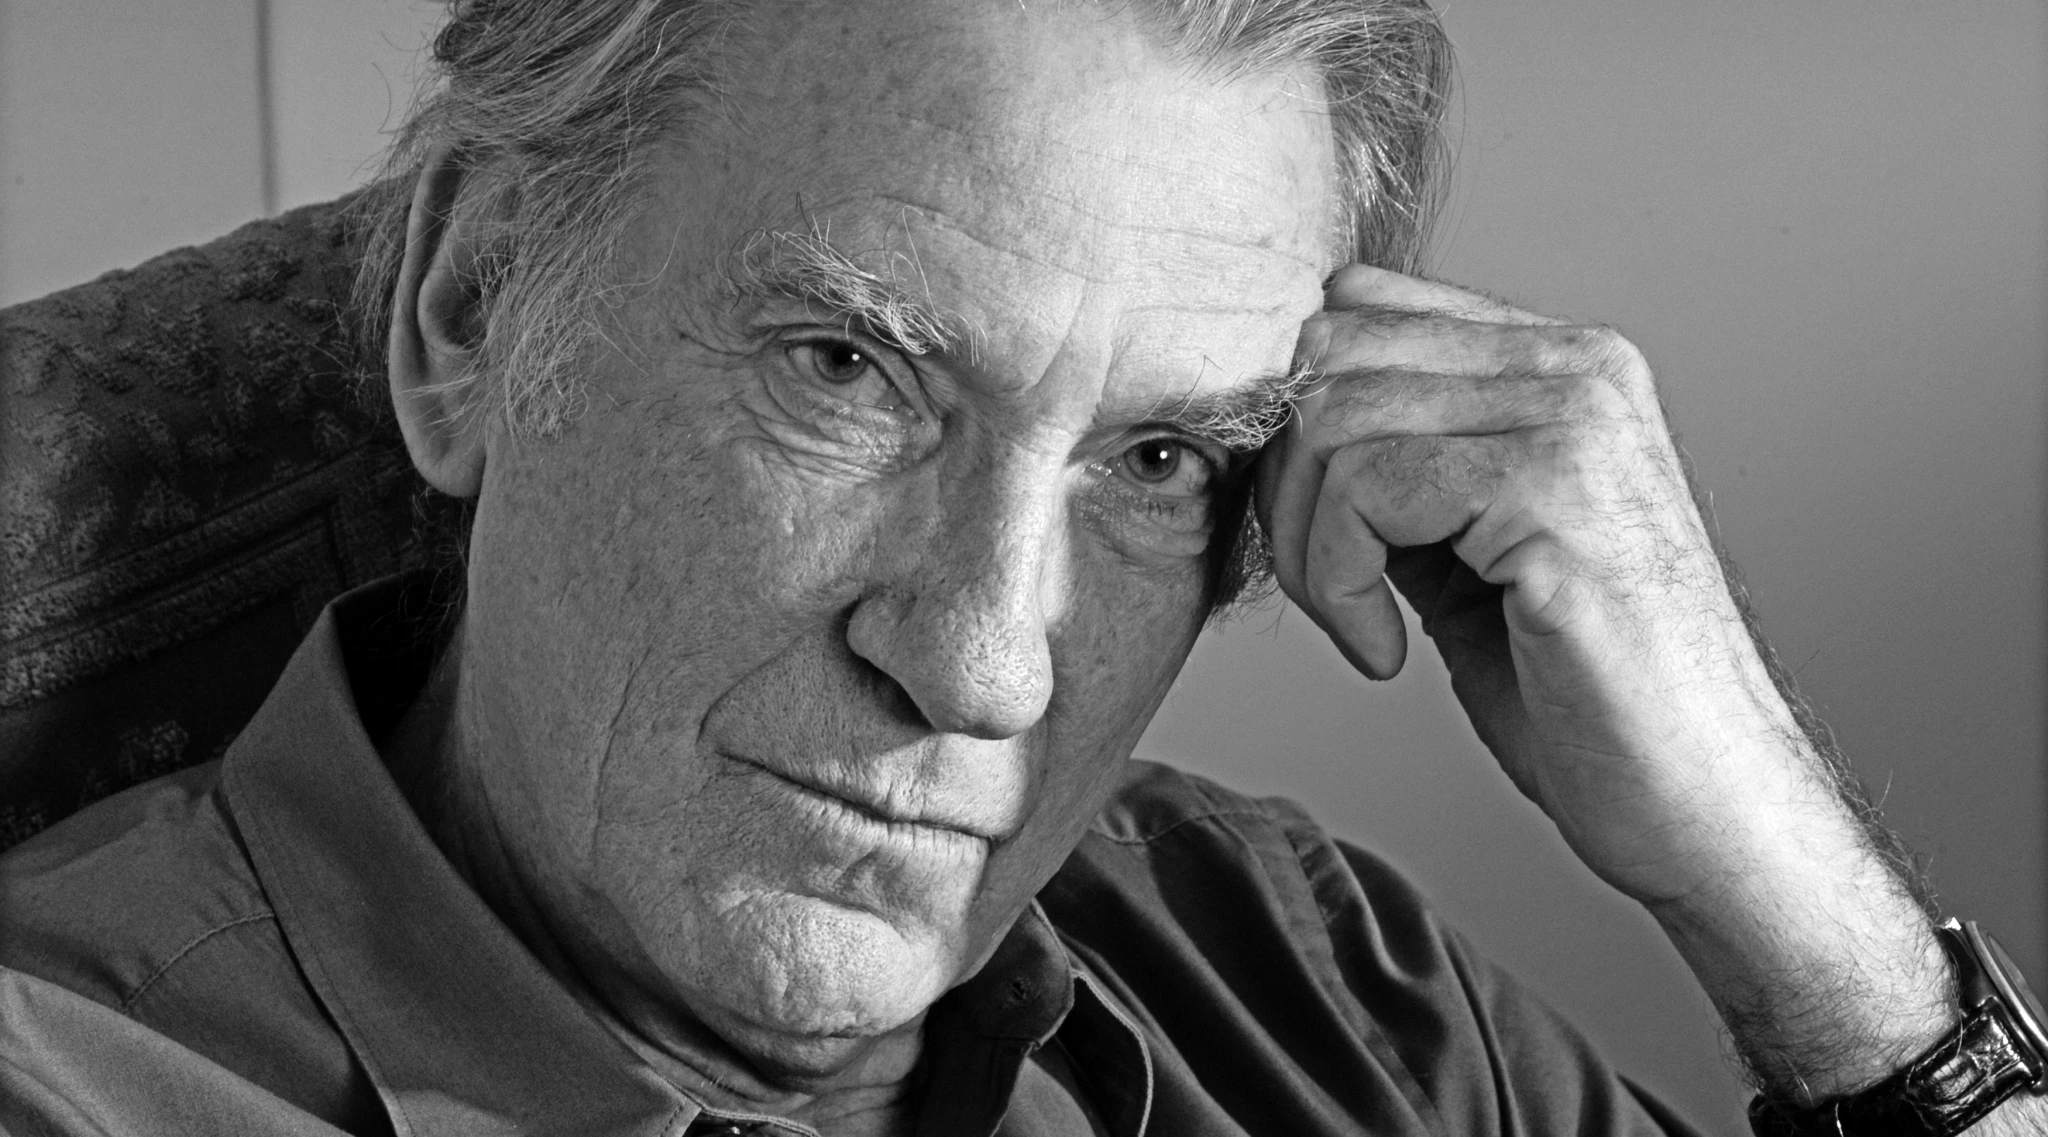 David Warner, 'Titanic' and 'The Omen' Actor, Dies at 80